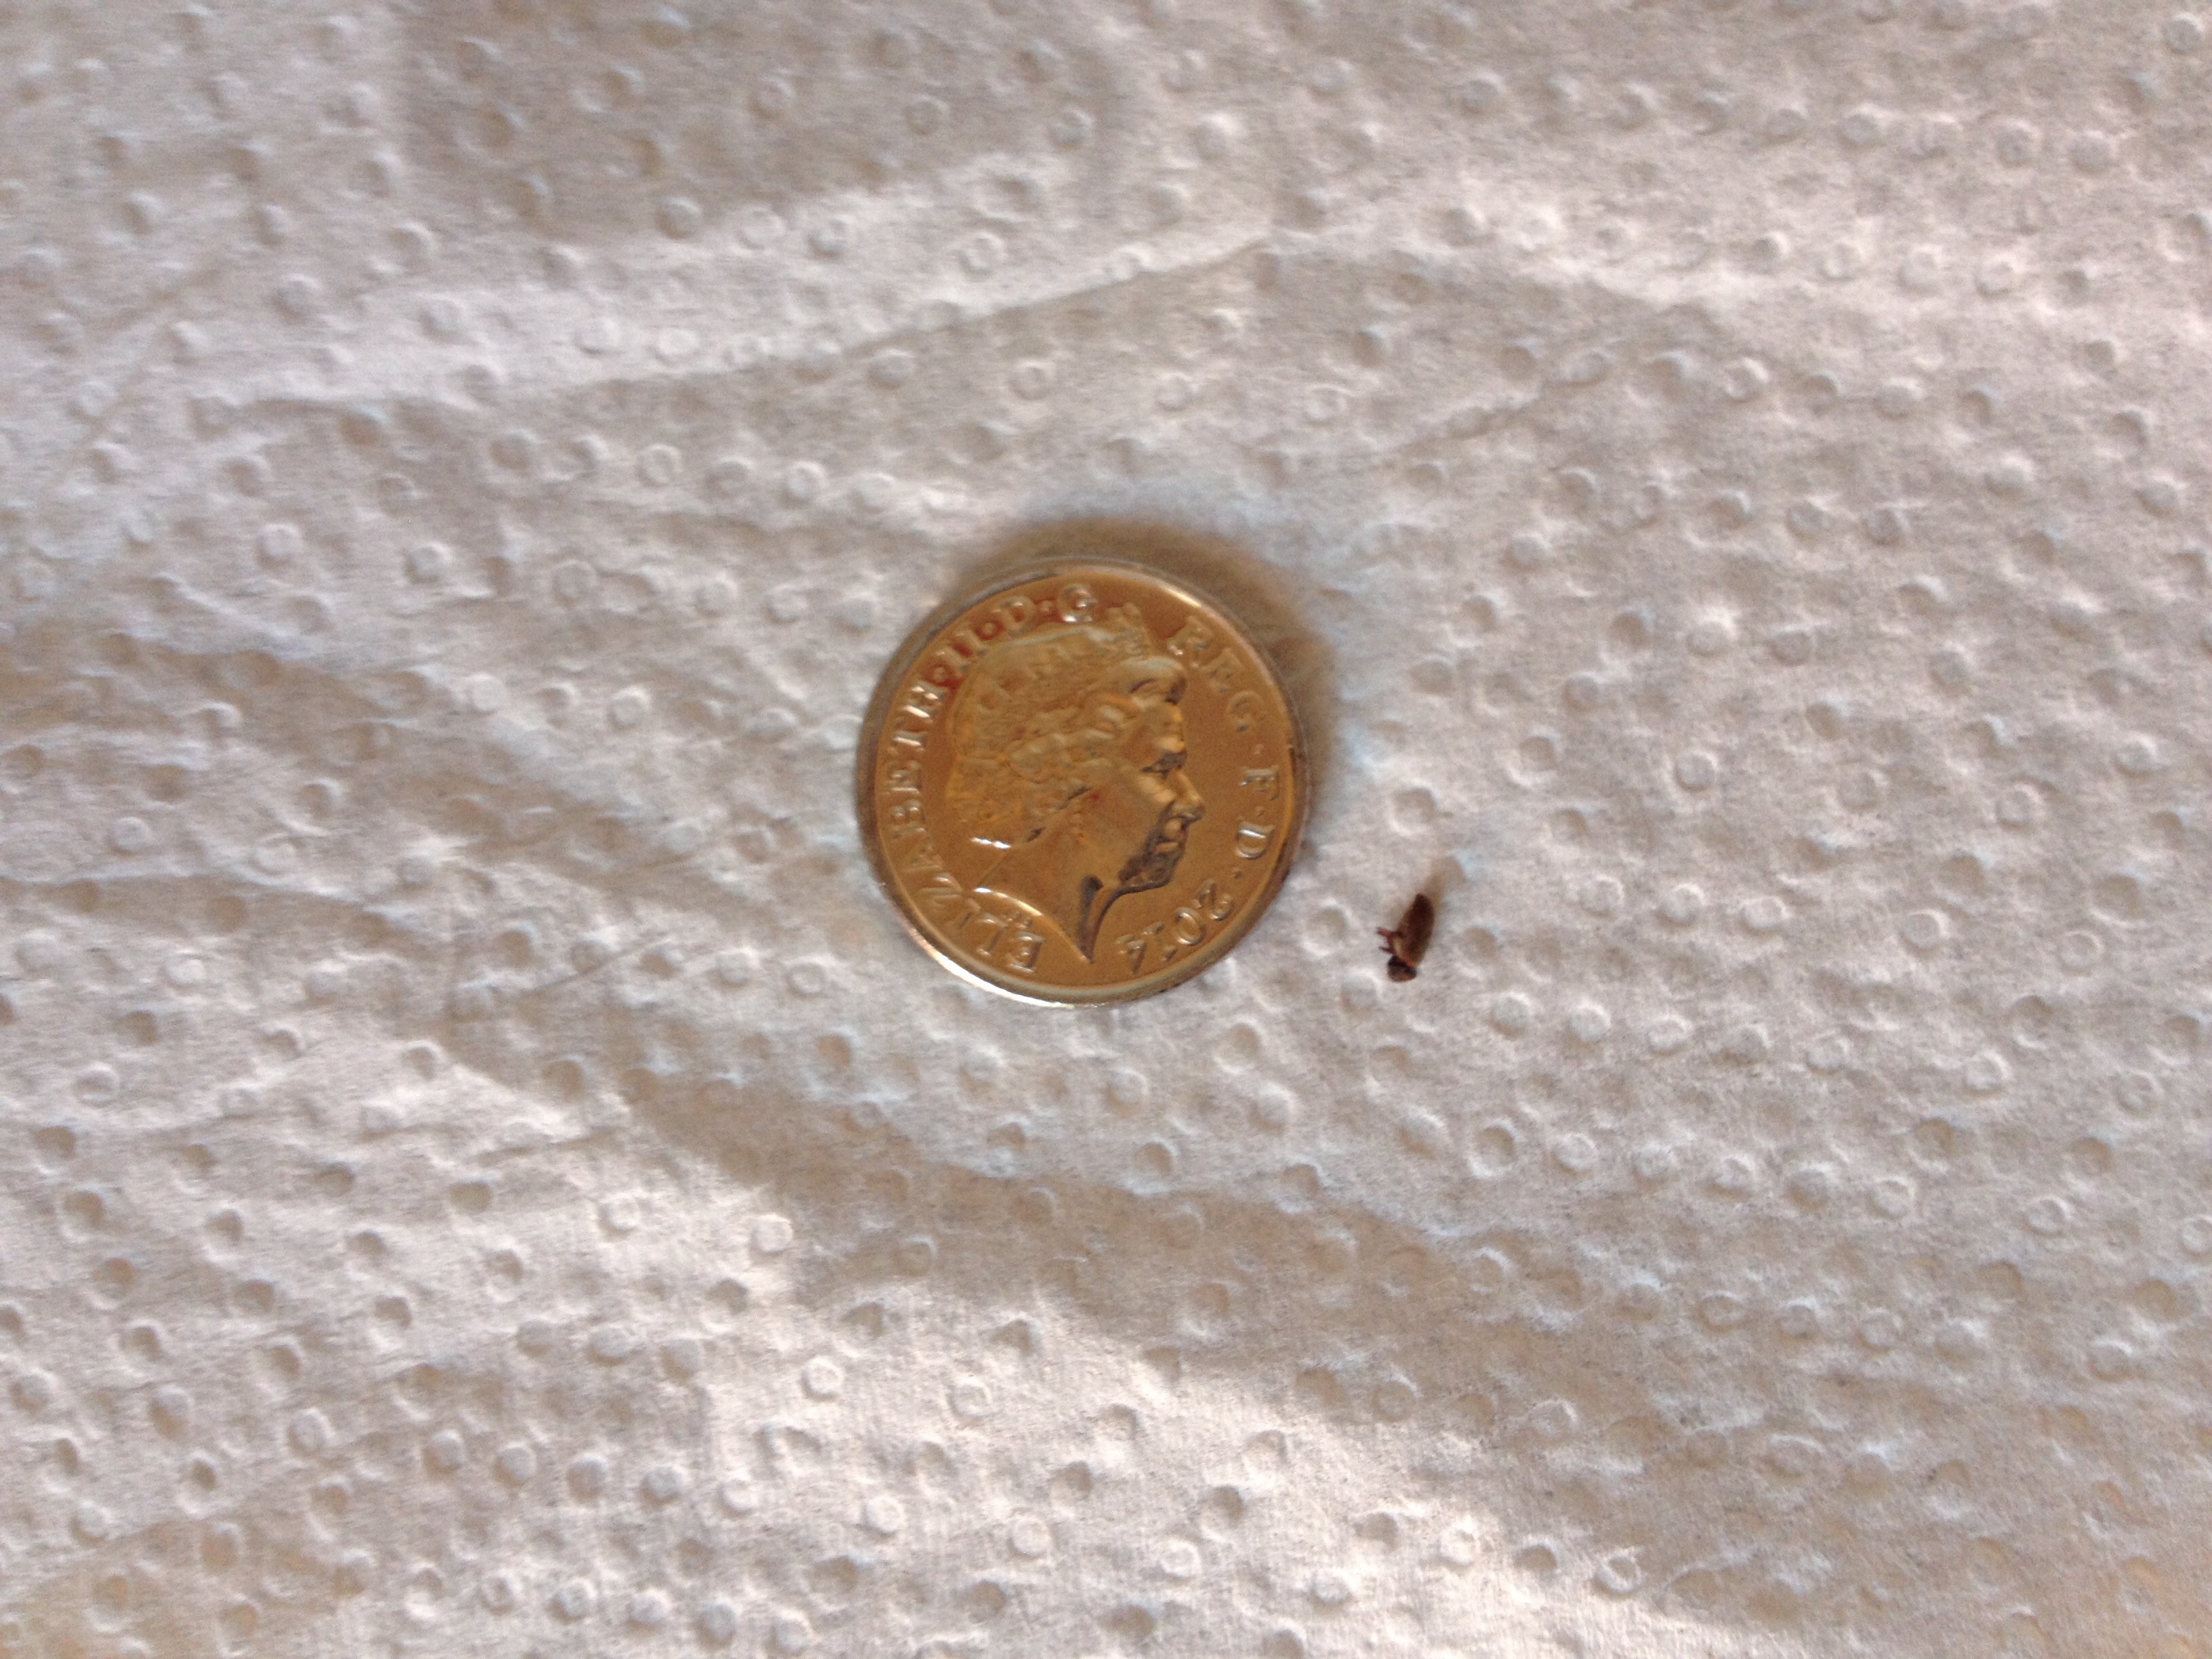 NaturePlus: Please help me identify tiny black bugs found in bathroom-  really worried incase it causes any damage or if it's harmless!